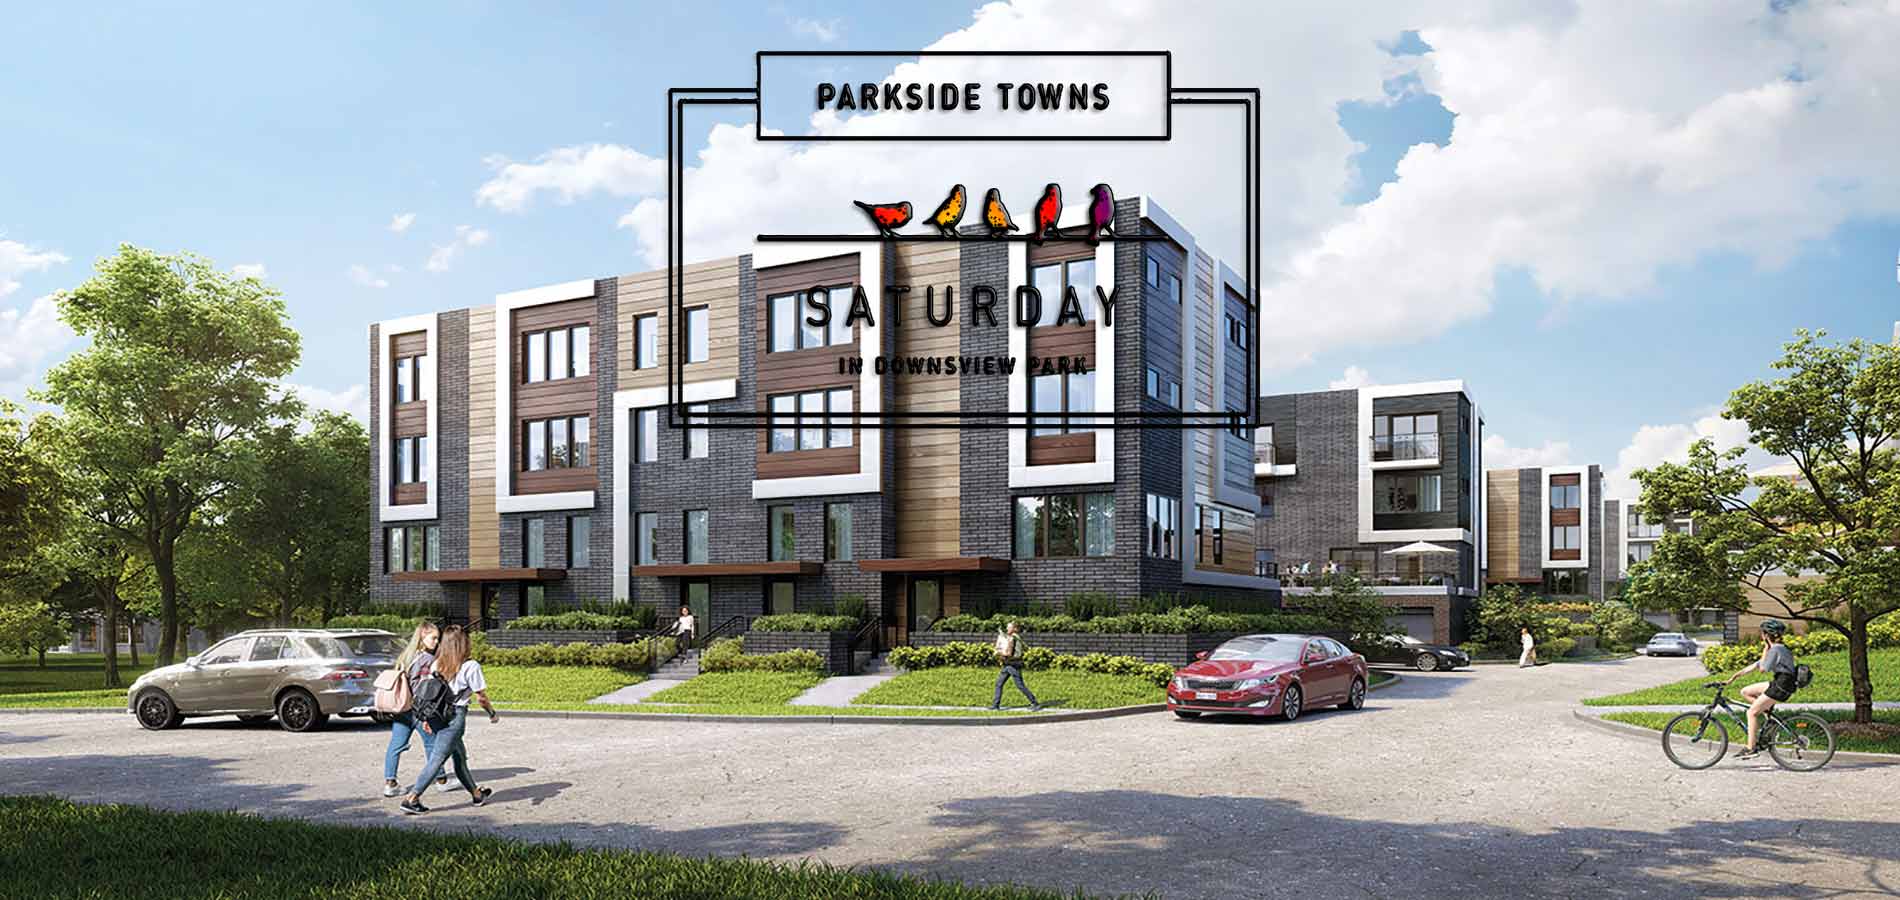 PARKSIDE TOWNS AT SATURDAY in DOWNSVIEW PARK